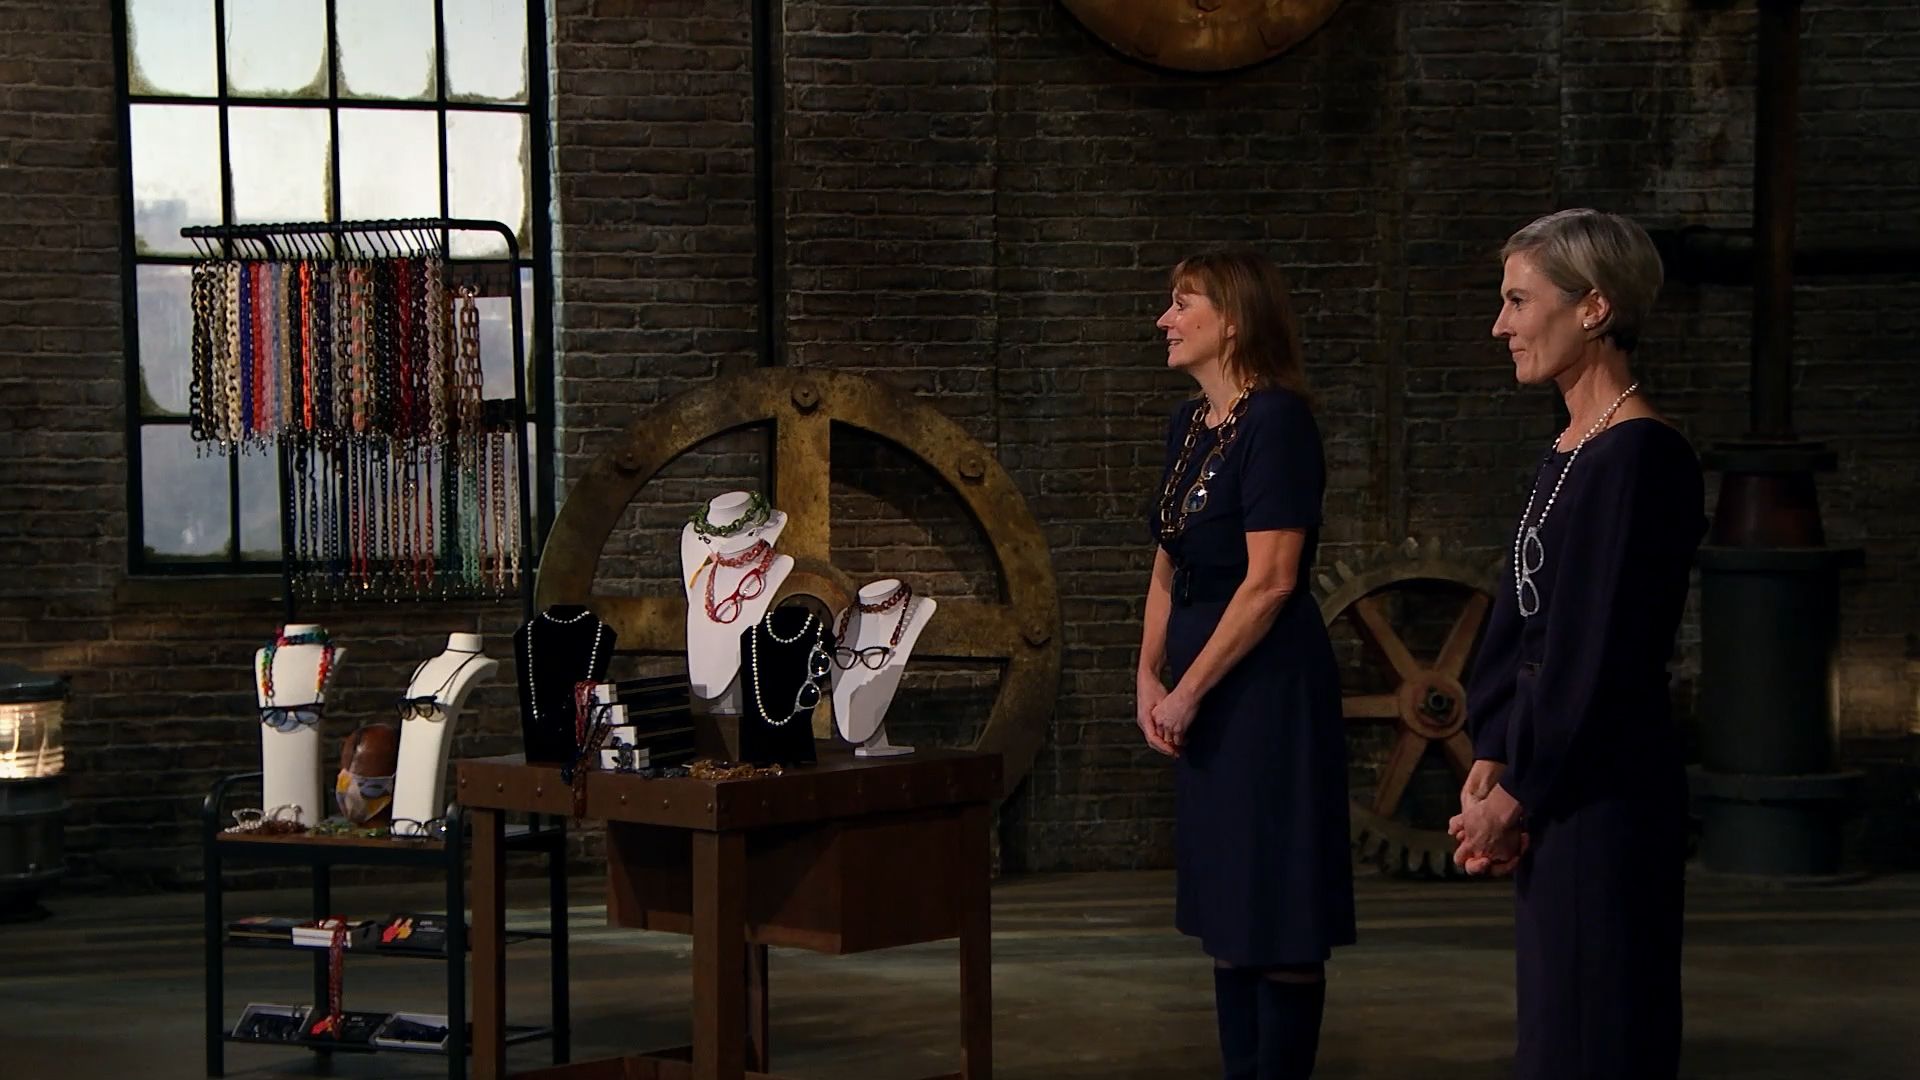 Sights Set On a Bright Future As Seen on Dragons’ Den